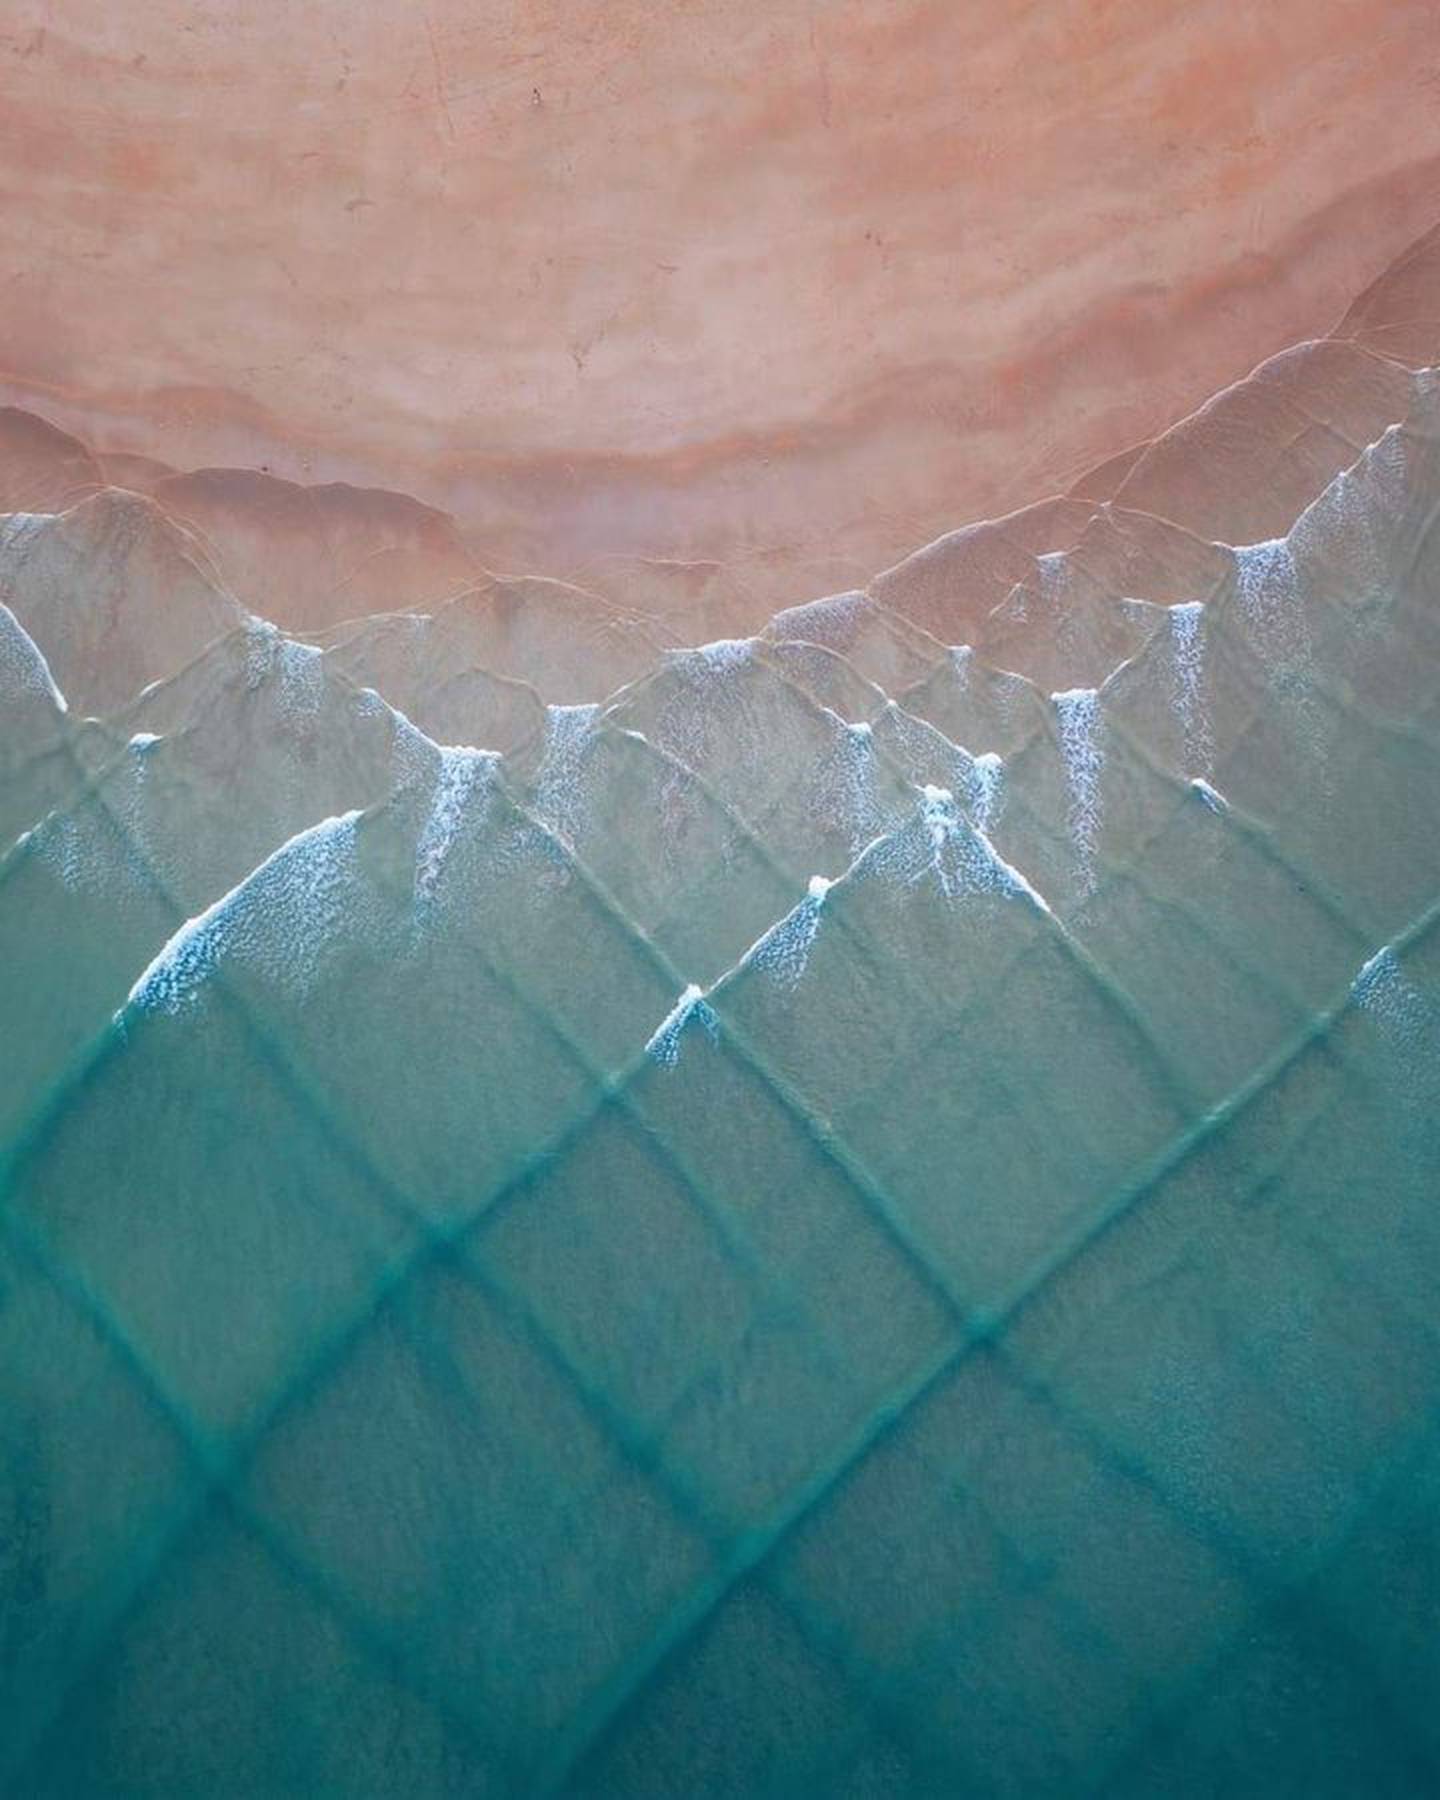 Two-dimensional wave patterns off the coast of a New Zealand island